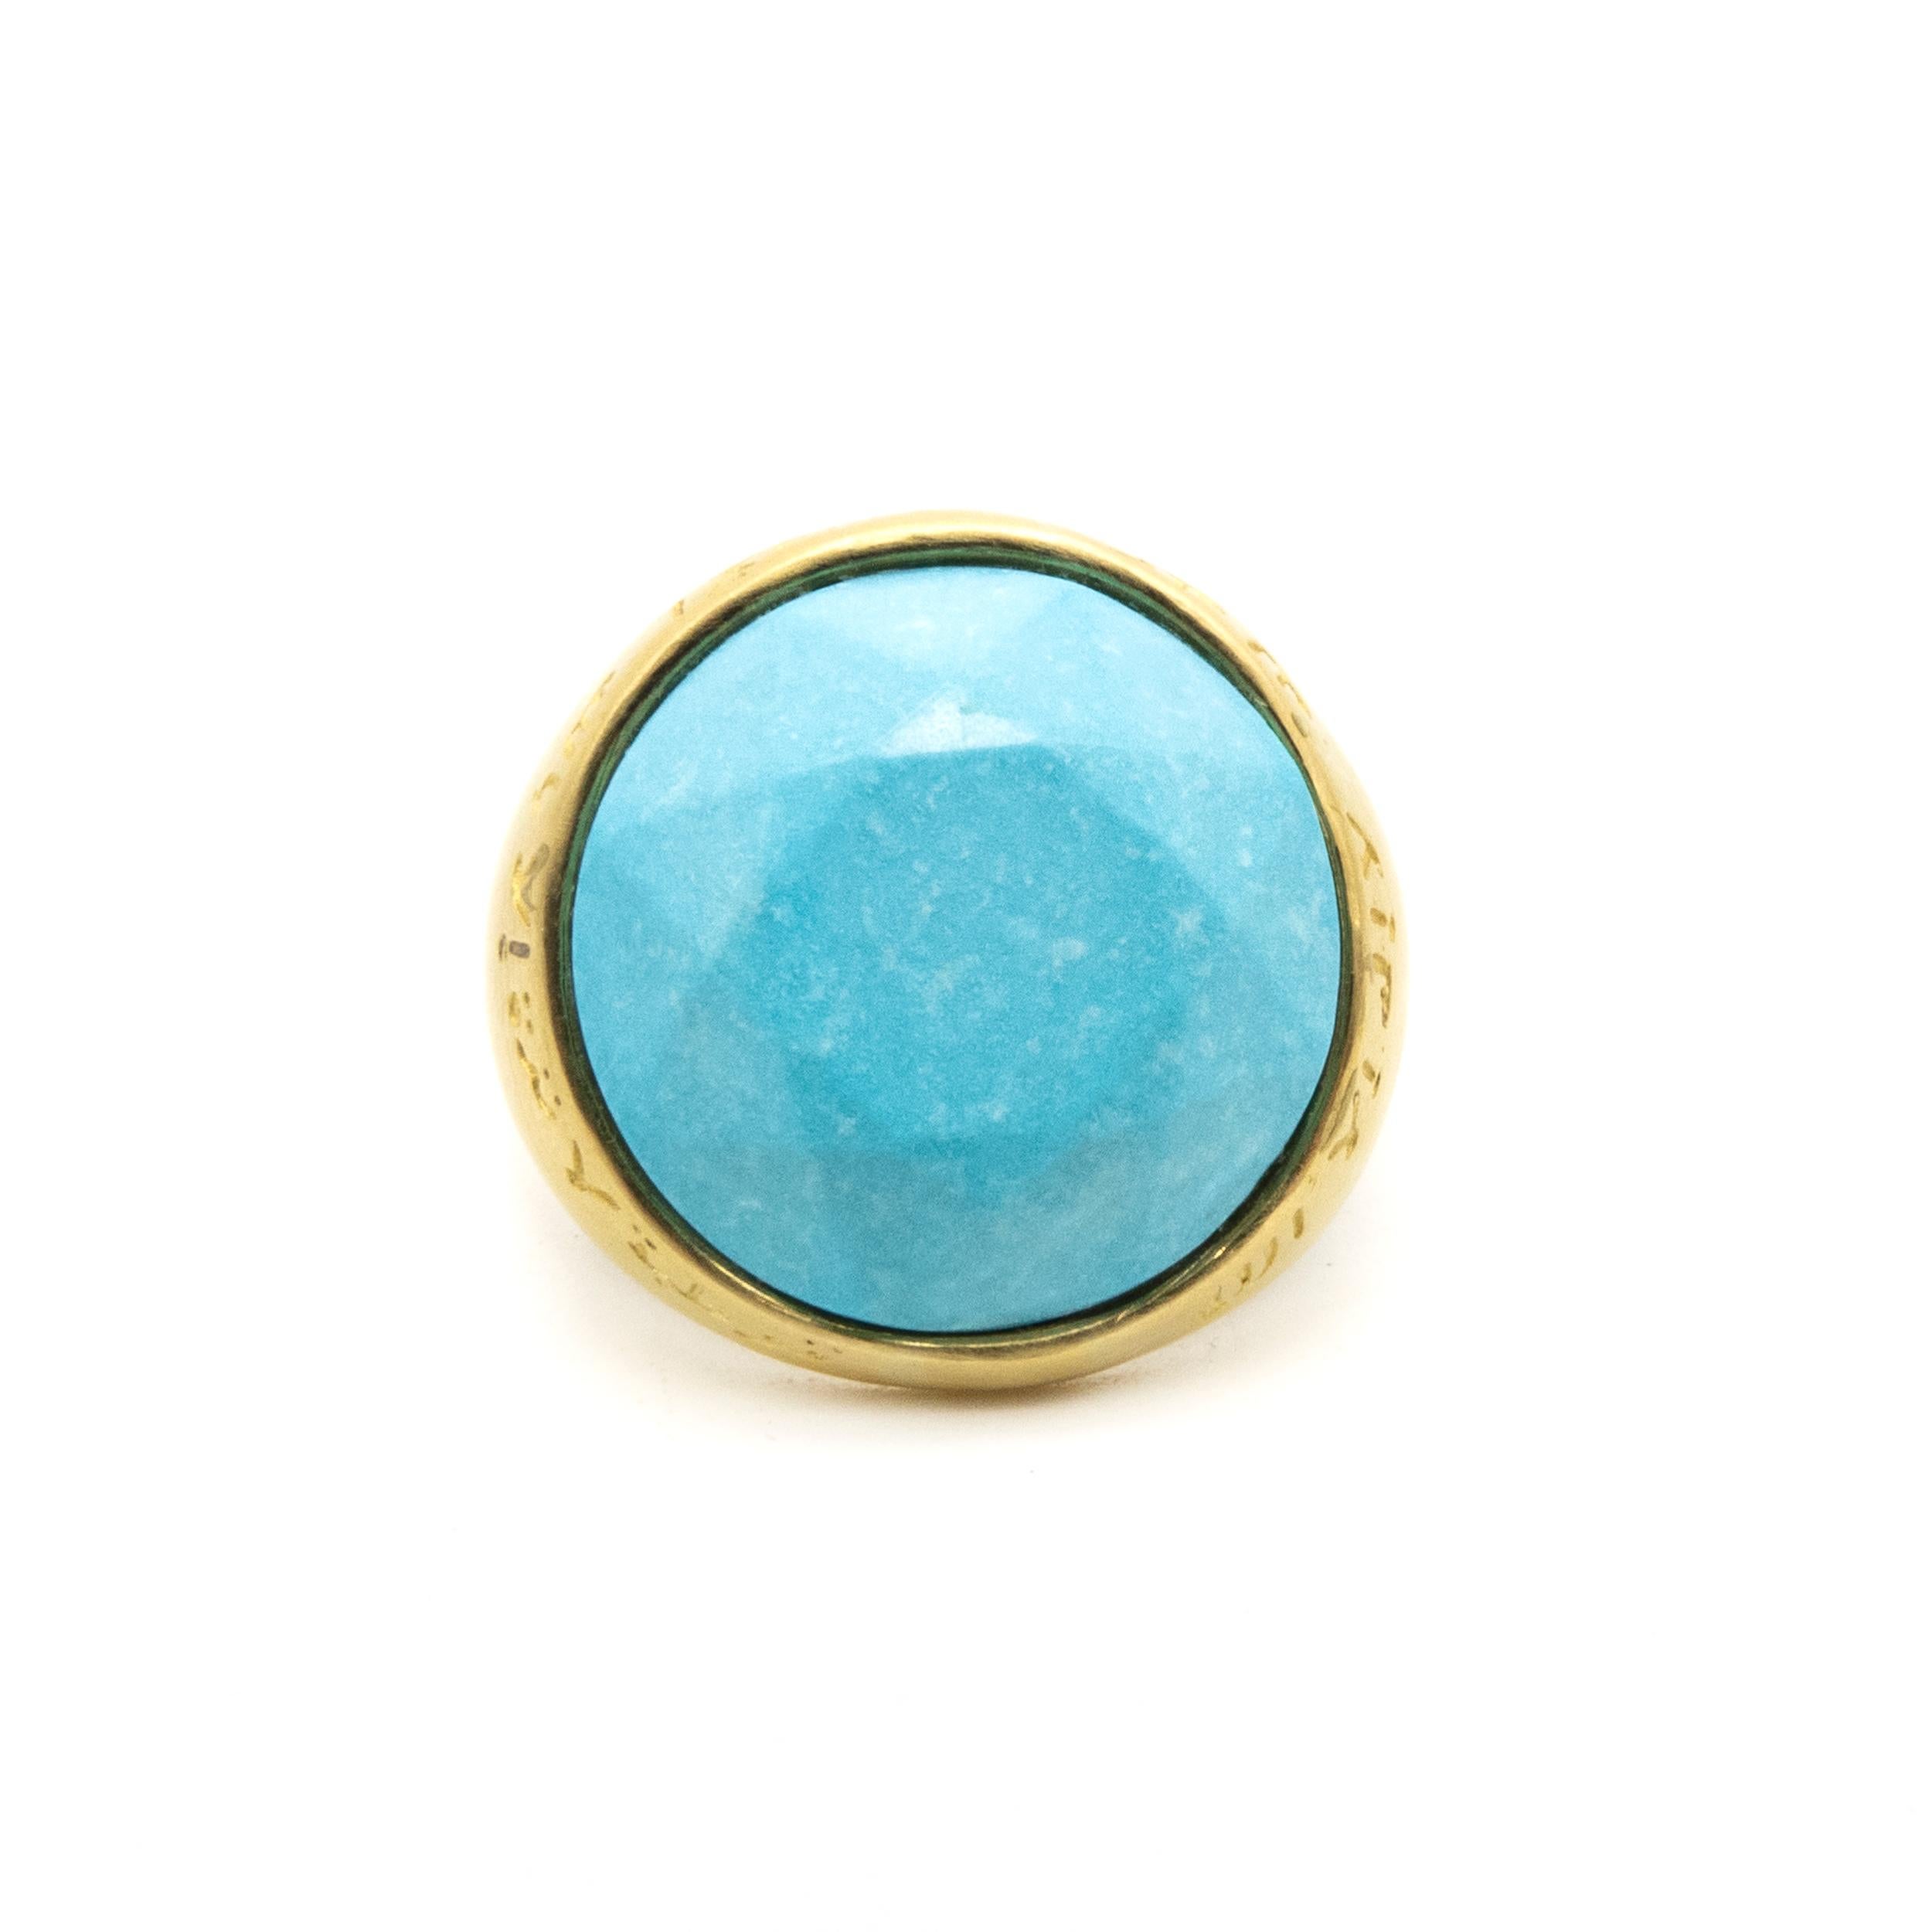 21st Century 18 Karat Yellow Gold Cocktail Ring Blue Turquoise

Behold the Elegance of the 21st Century: 18 Karat Yellow Gold Cocktail Ring with Blue Persian Turquoise.

Step into a world of timeless beauty with this magnificent 18 karat yellow gold